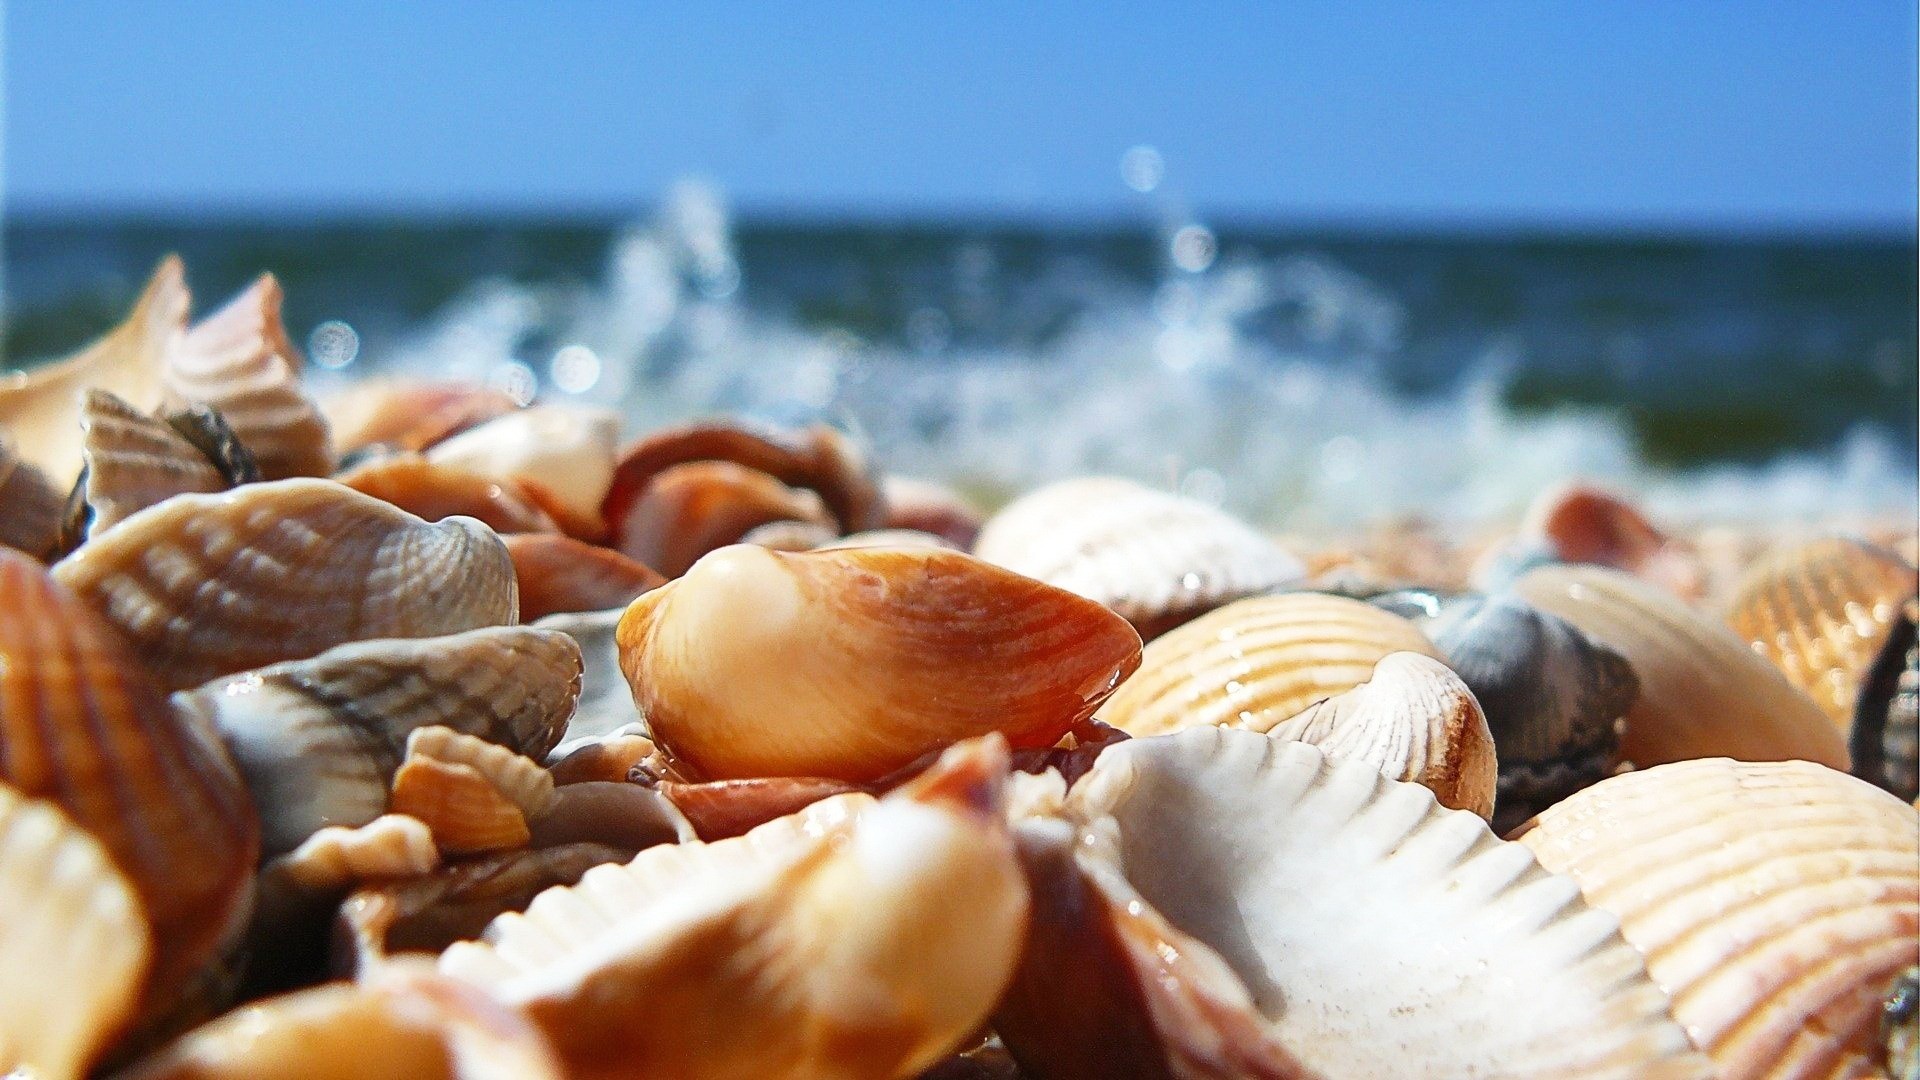 Sea Shell: Serves to protect and support bodies of snails, bivalves, and chitons. 1920x1080 Full HD Wallpaper.